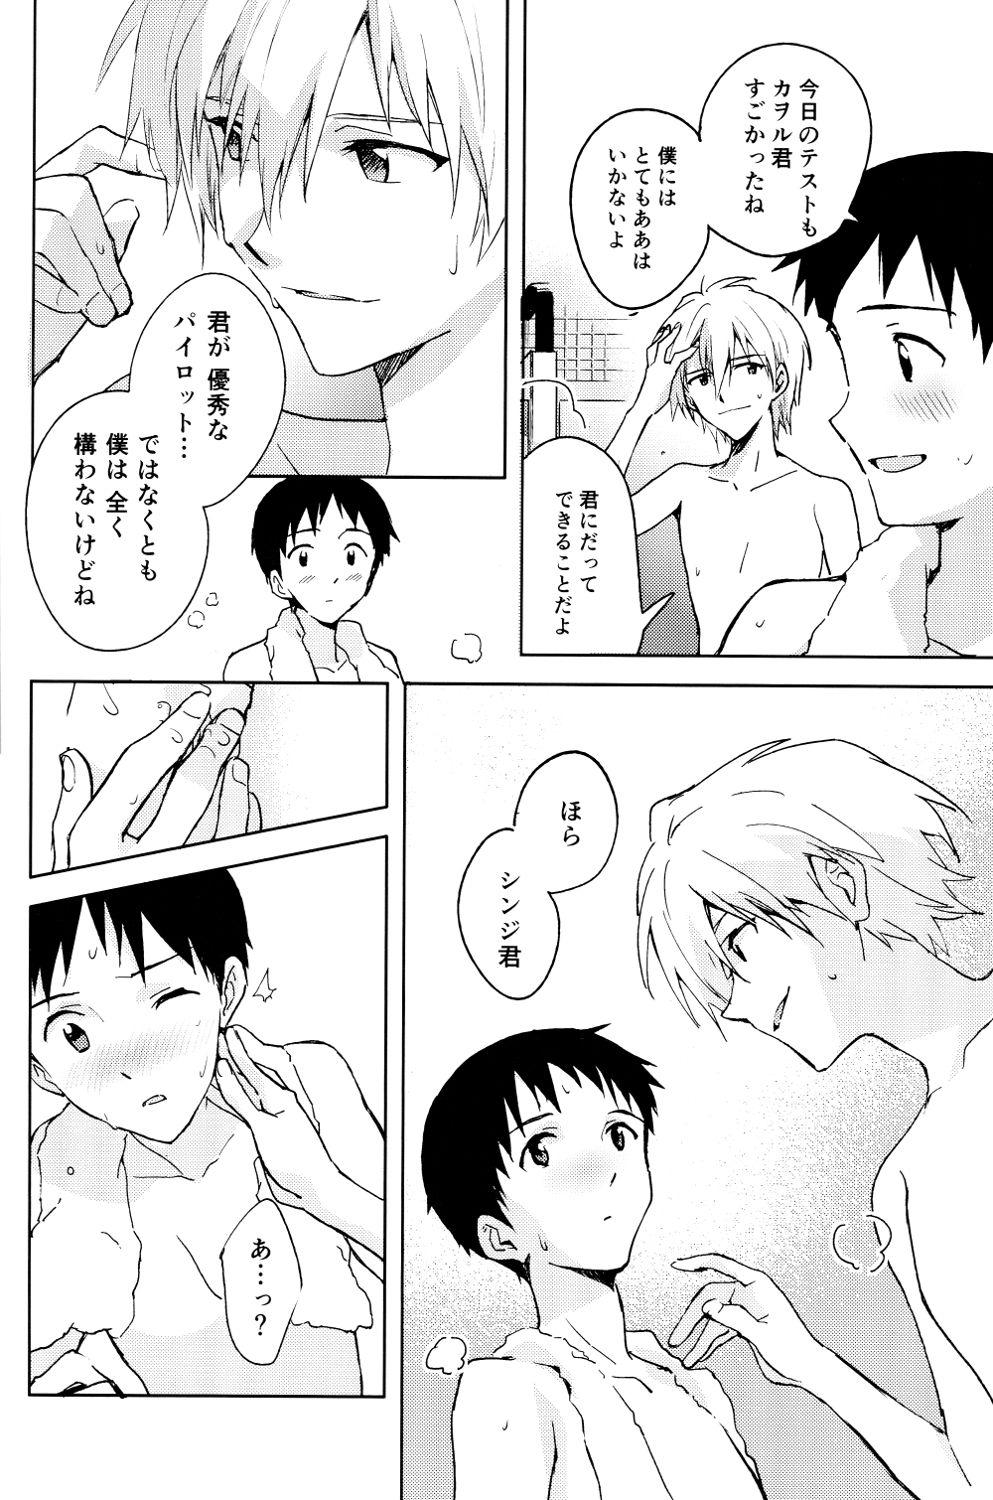 Teenxxx FLY ME TO THE MOON - Neon genesis evangelion Gay Physicals - Page 12